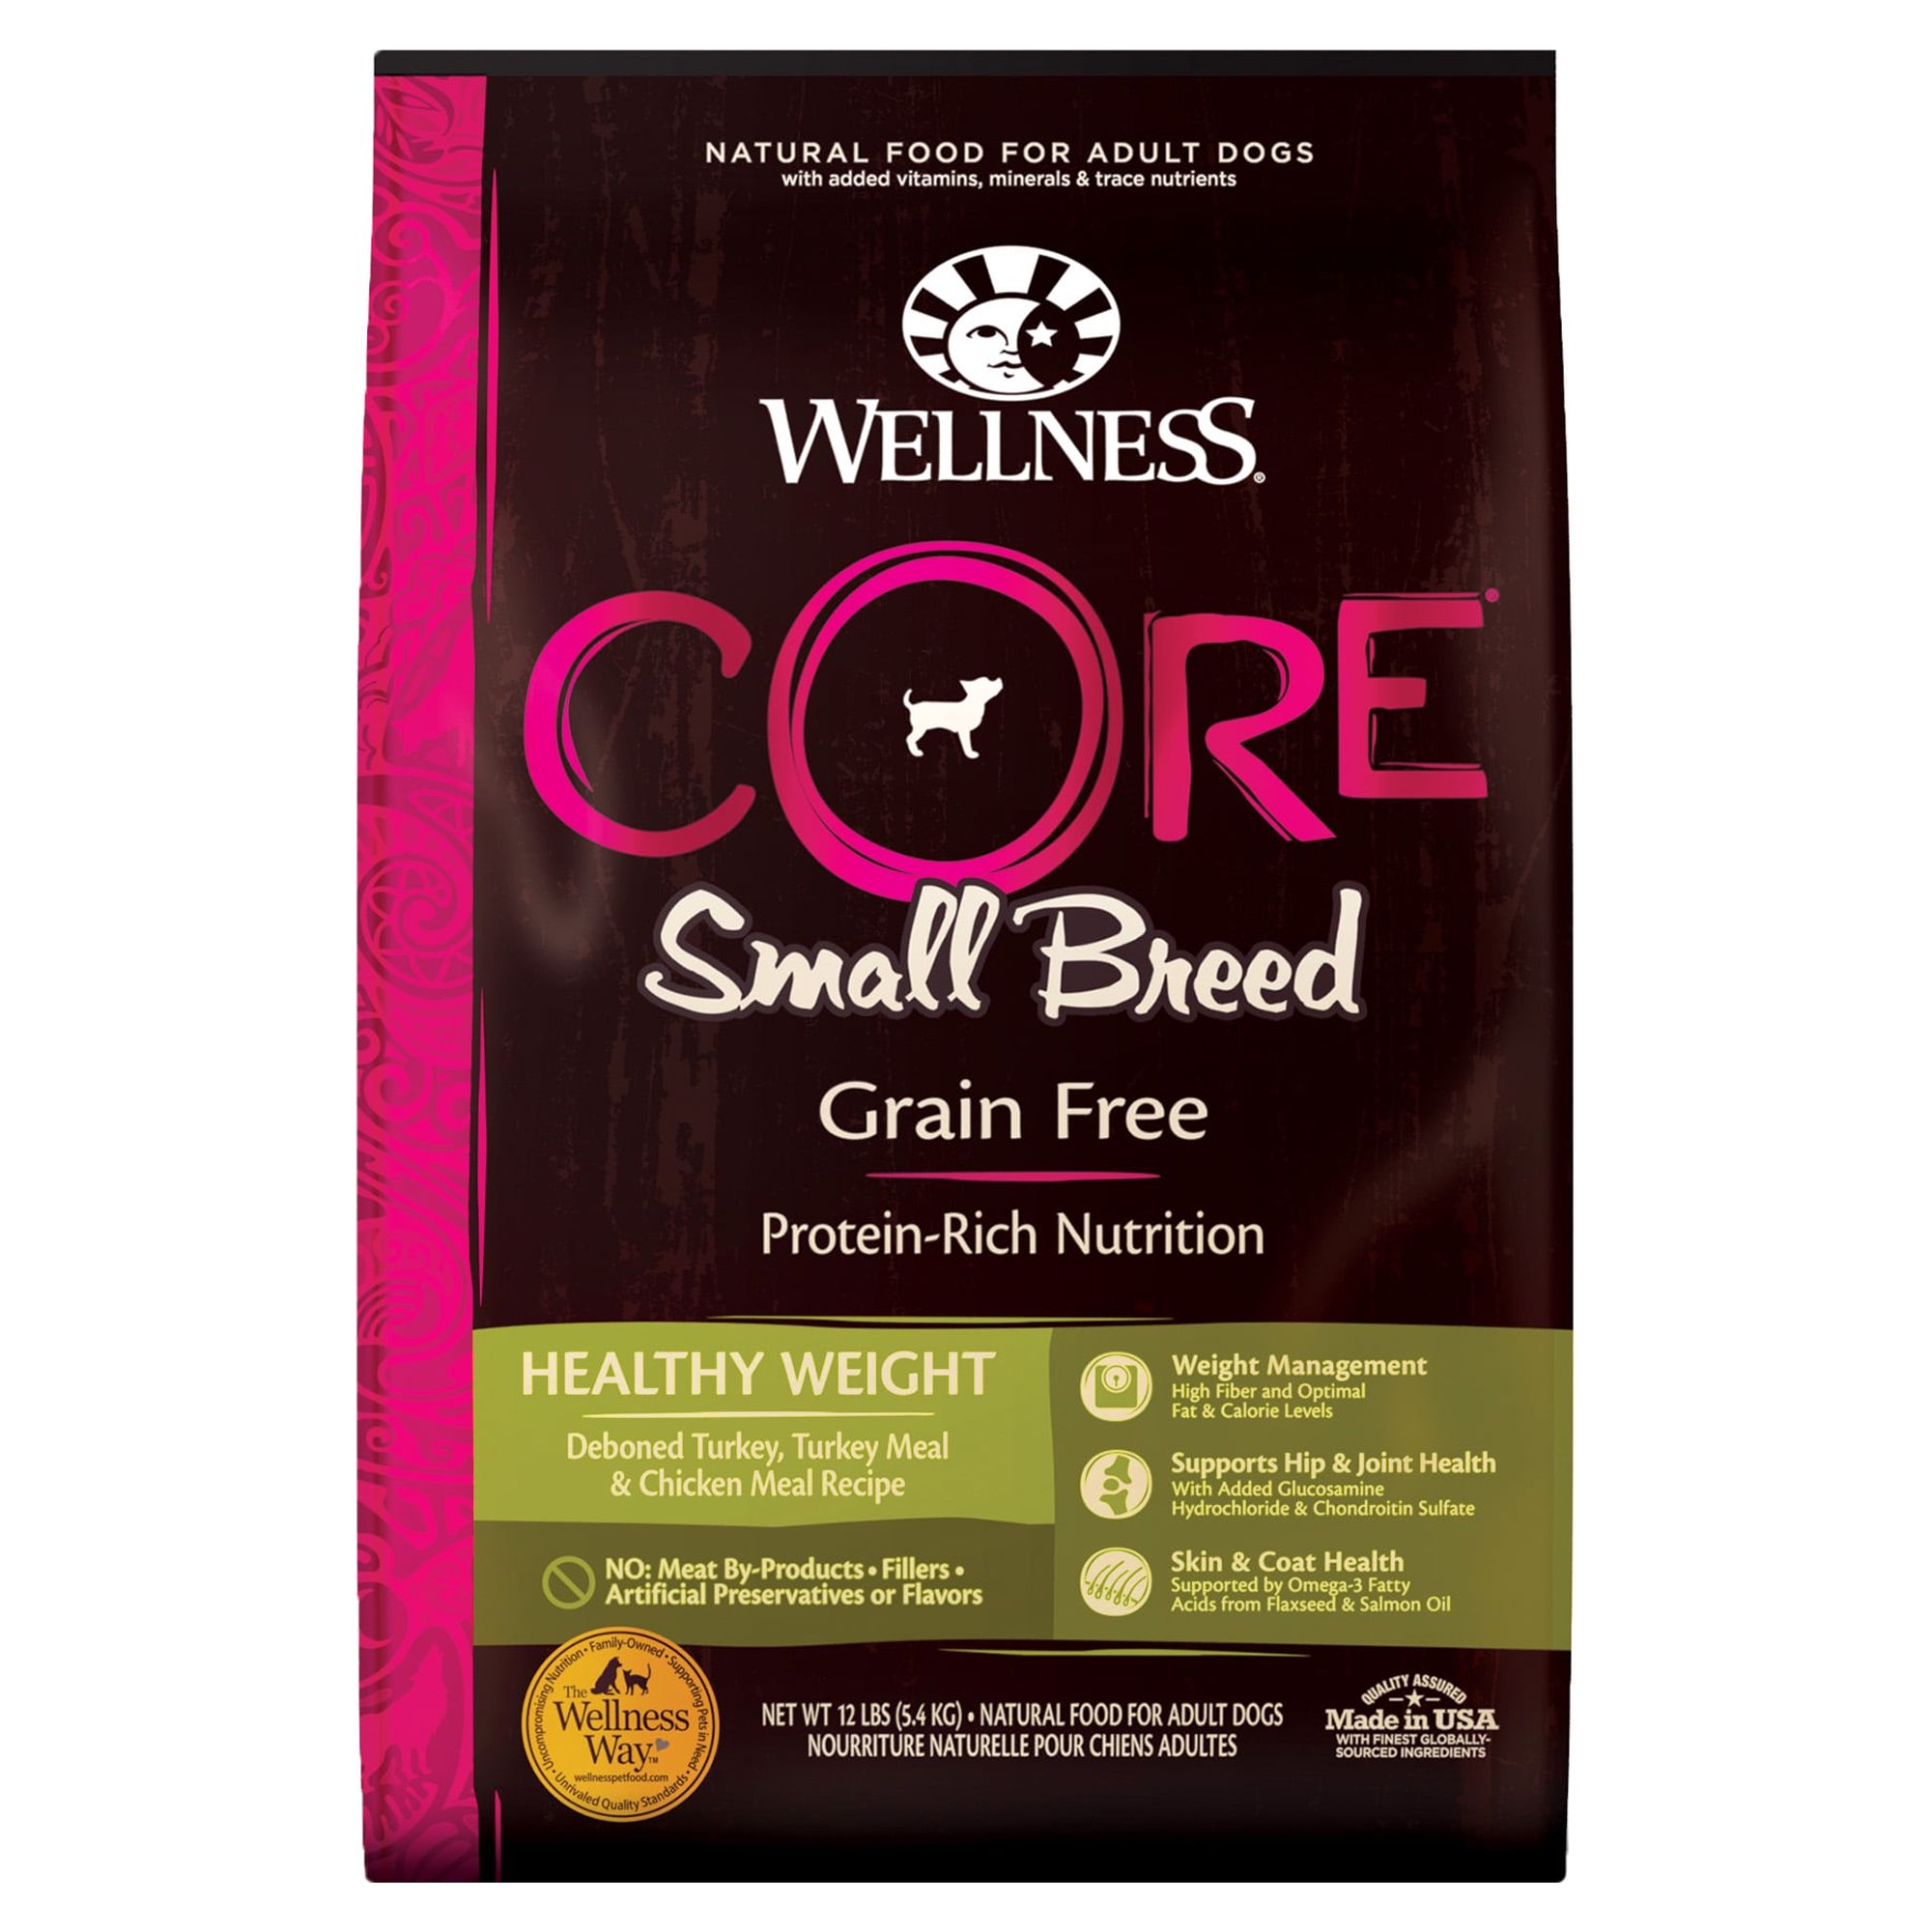 Wellness CORE Natural Grain Free Dry Dog Food, Small Breed Healthy Weight, 12-Pound Bag - image 1 of 8